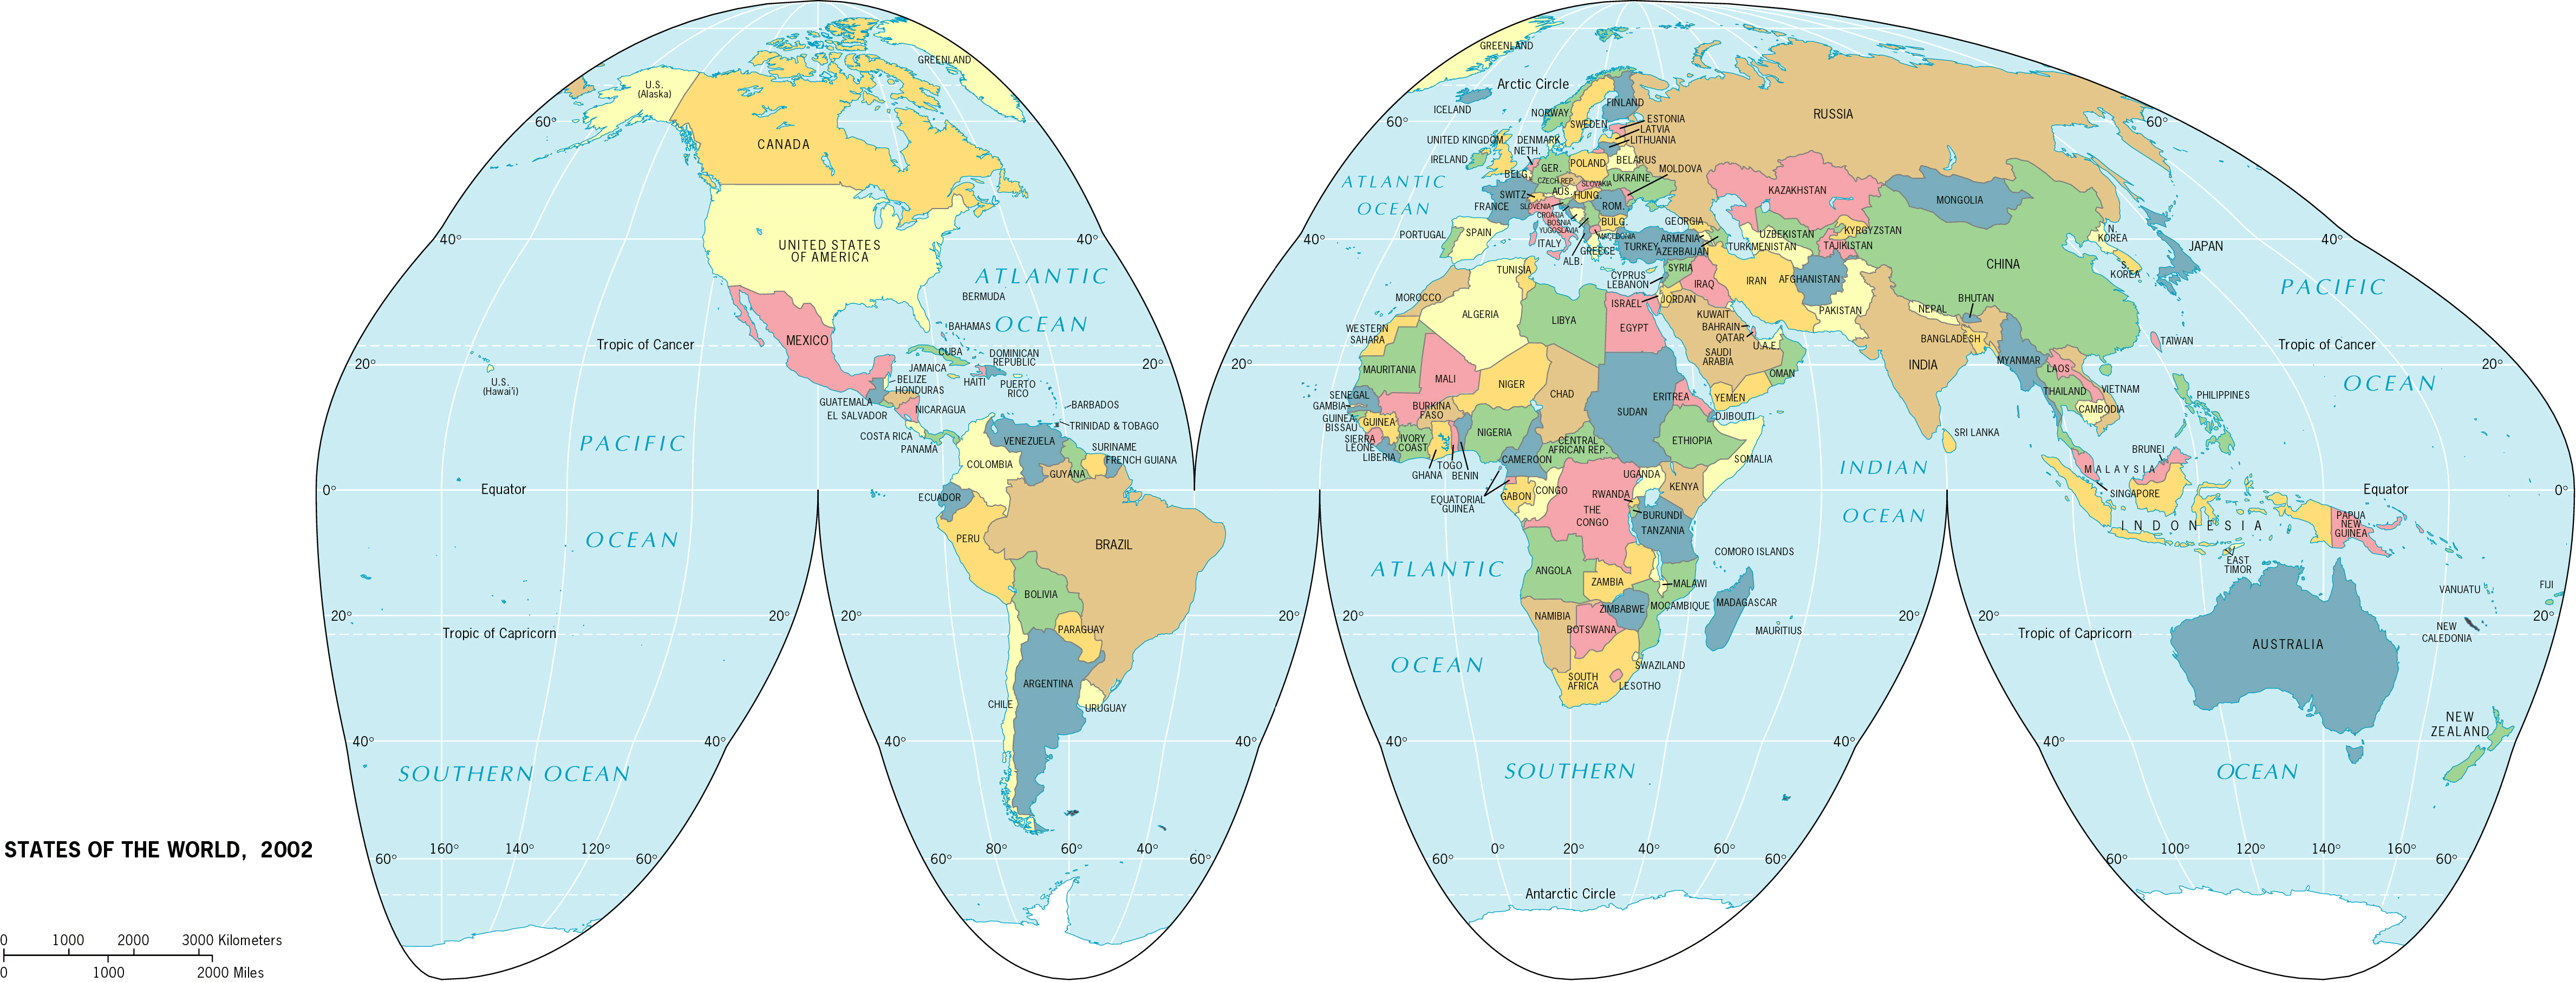 States on the world map